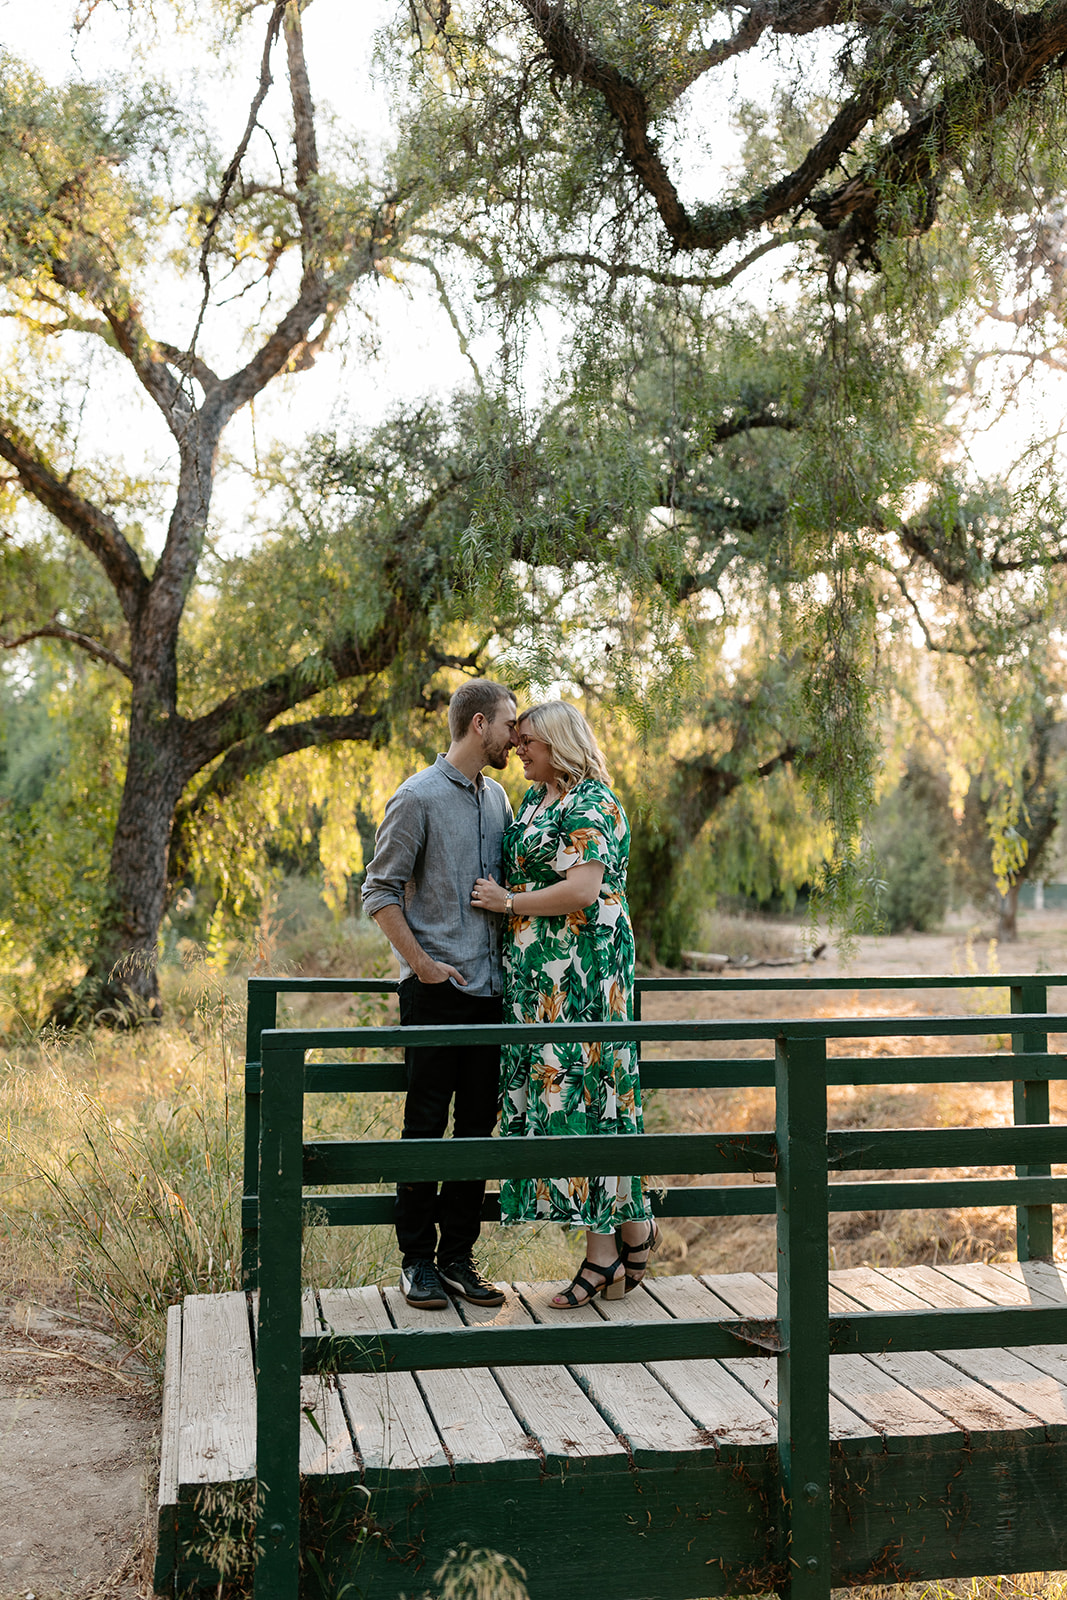 hiltscher park fullerton california engagement session engagement session photoshoot locations engagements photo session